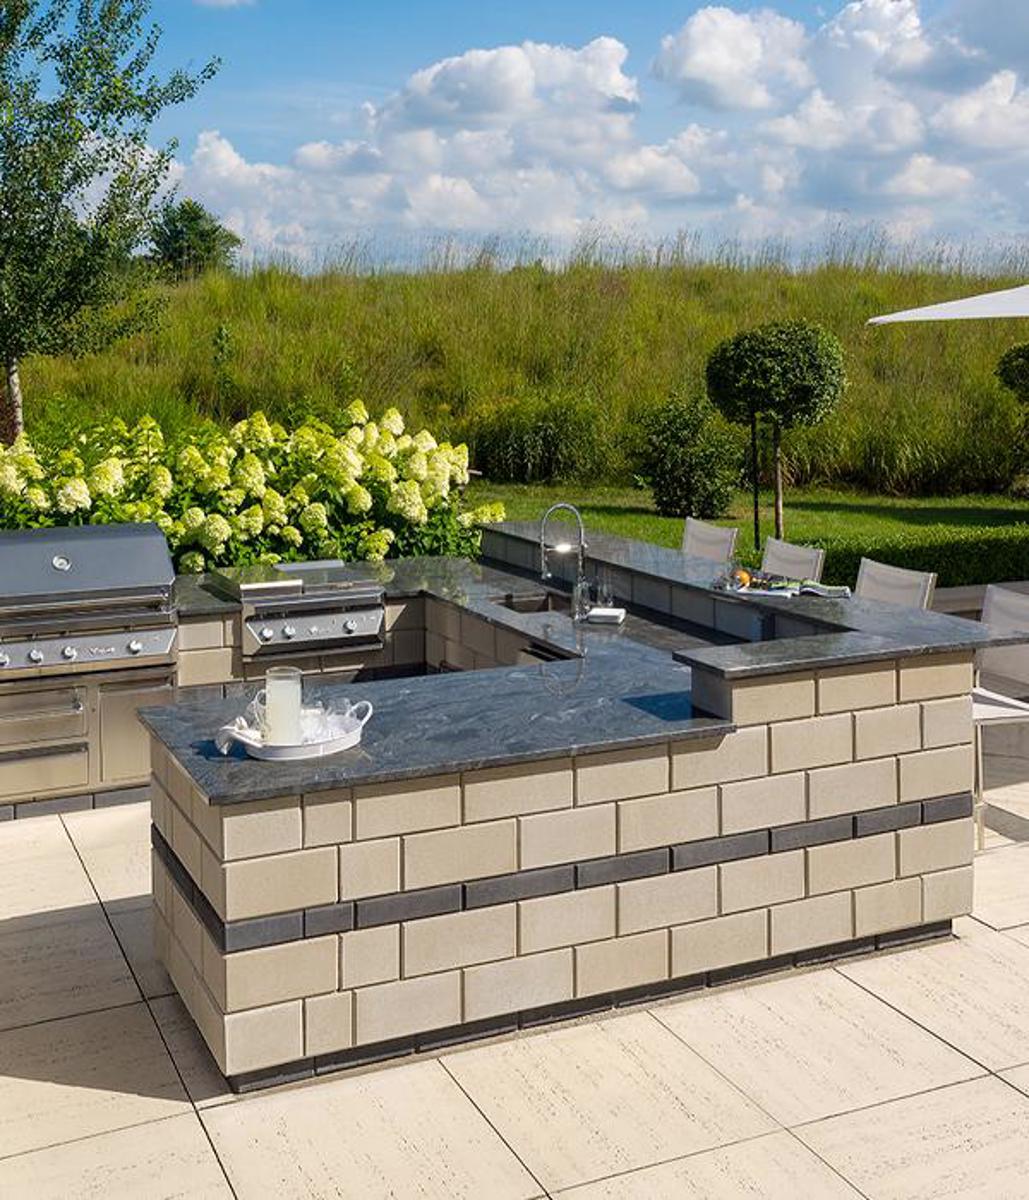 Techo bloc by space outdoor kitchens backyard bbq grill island walls slabs beige grey 2